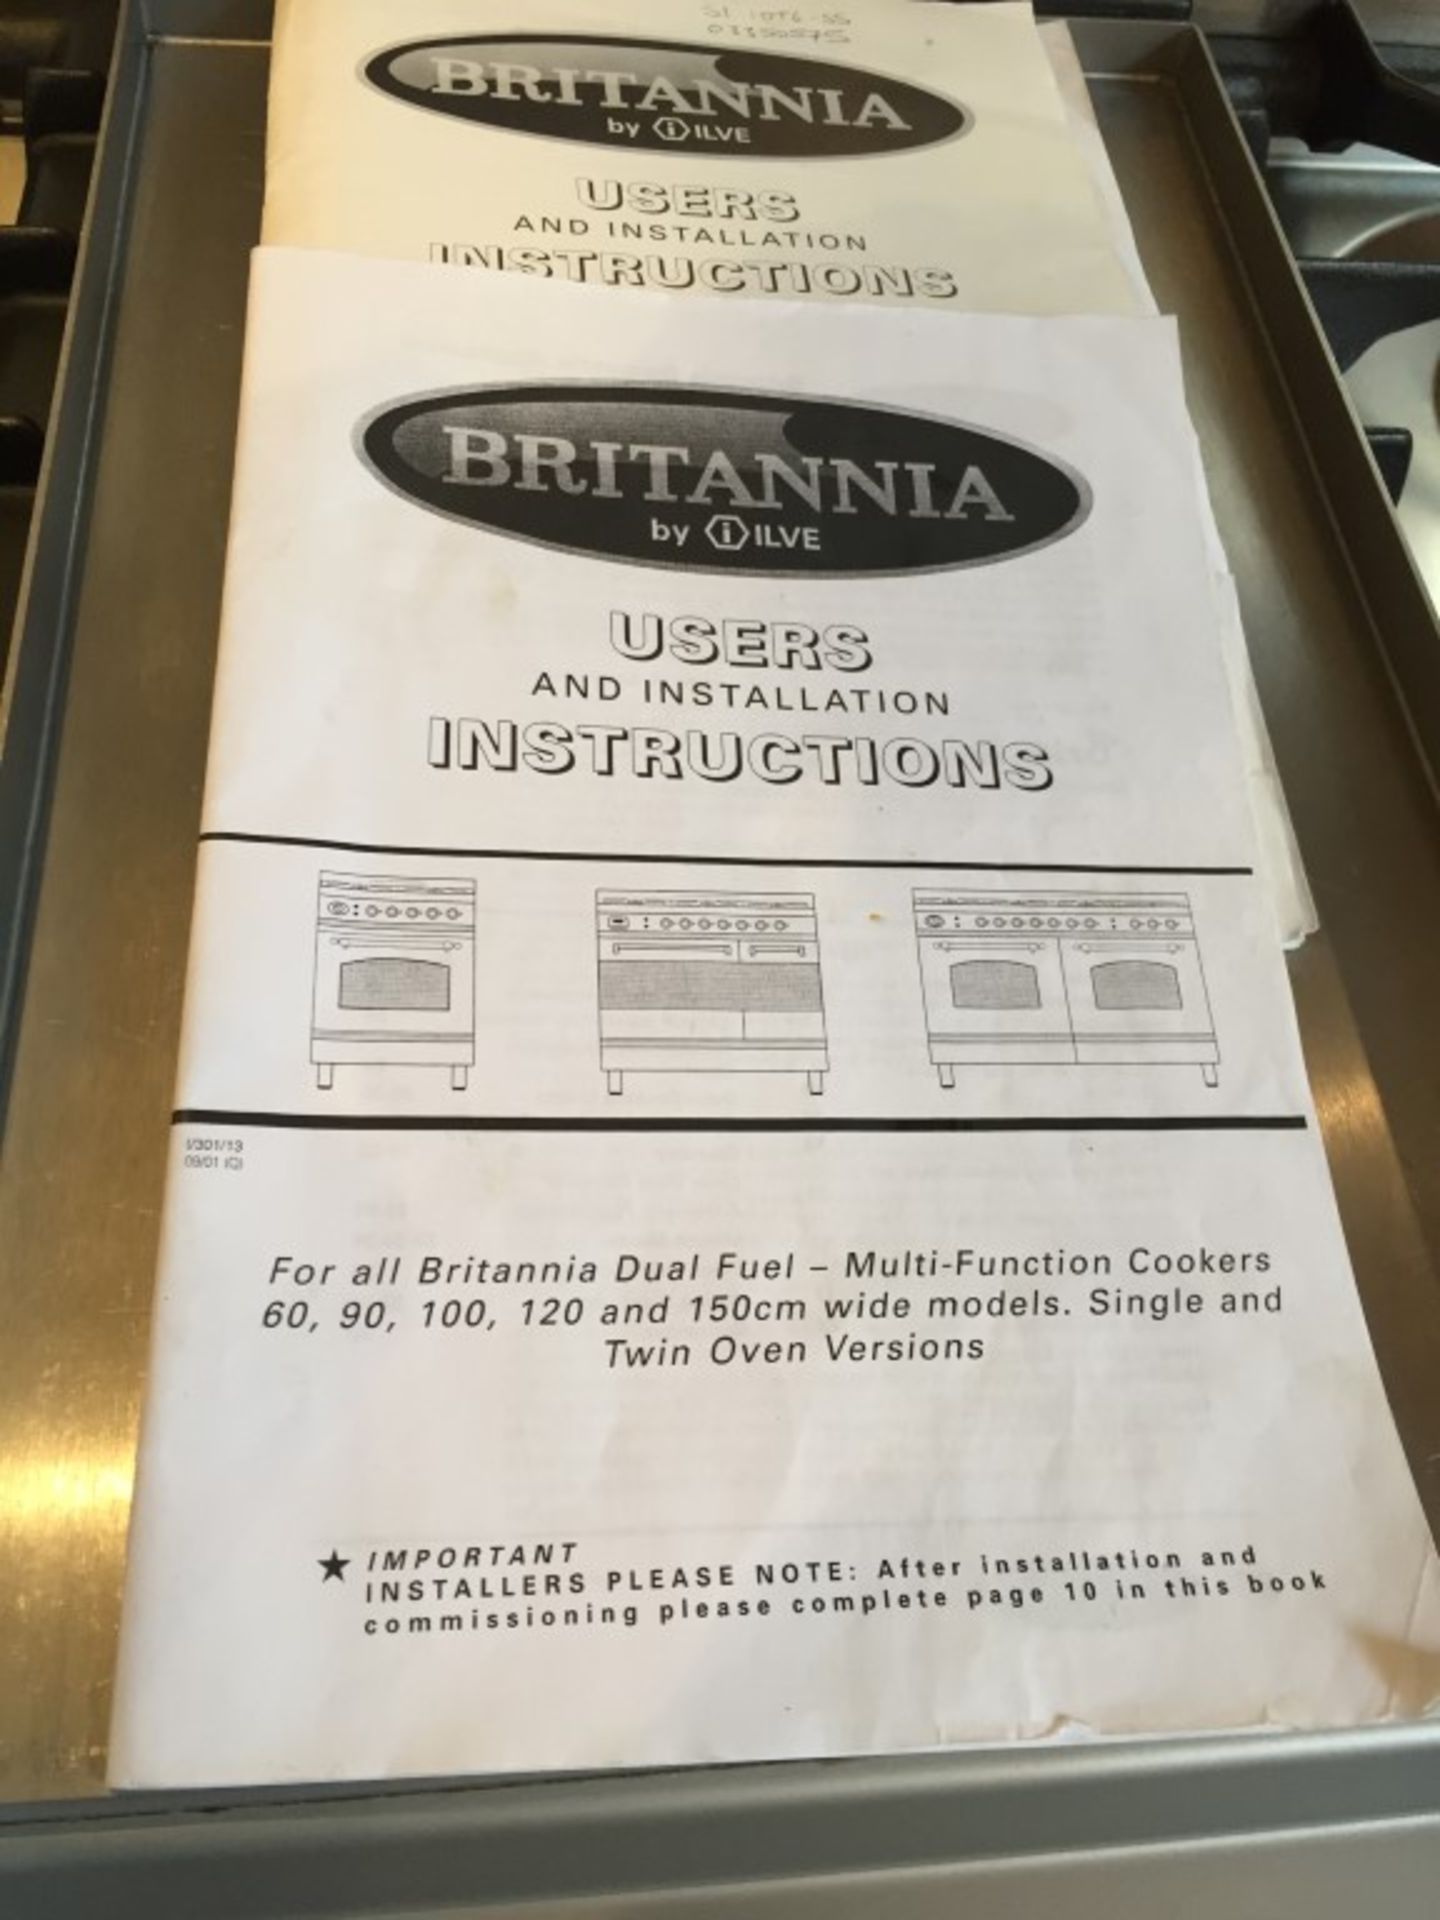 1 x Britannia Classic Range Cooker With Britannia Extractor Hood - Excellent Working Condition - Image 4 of 11